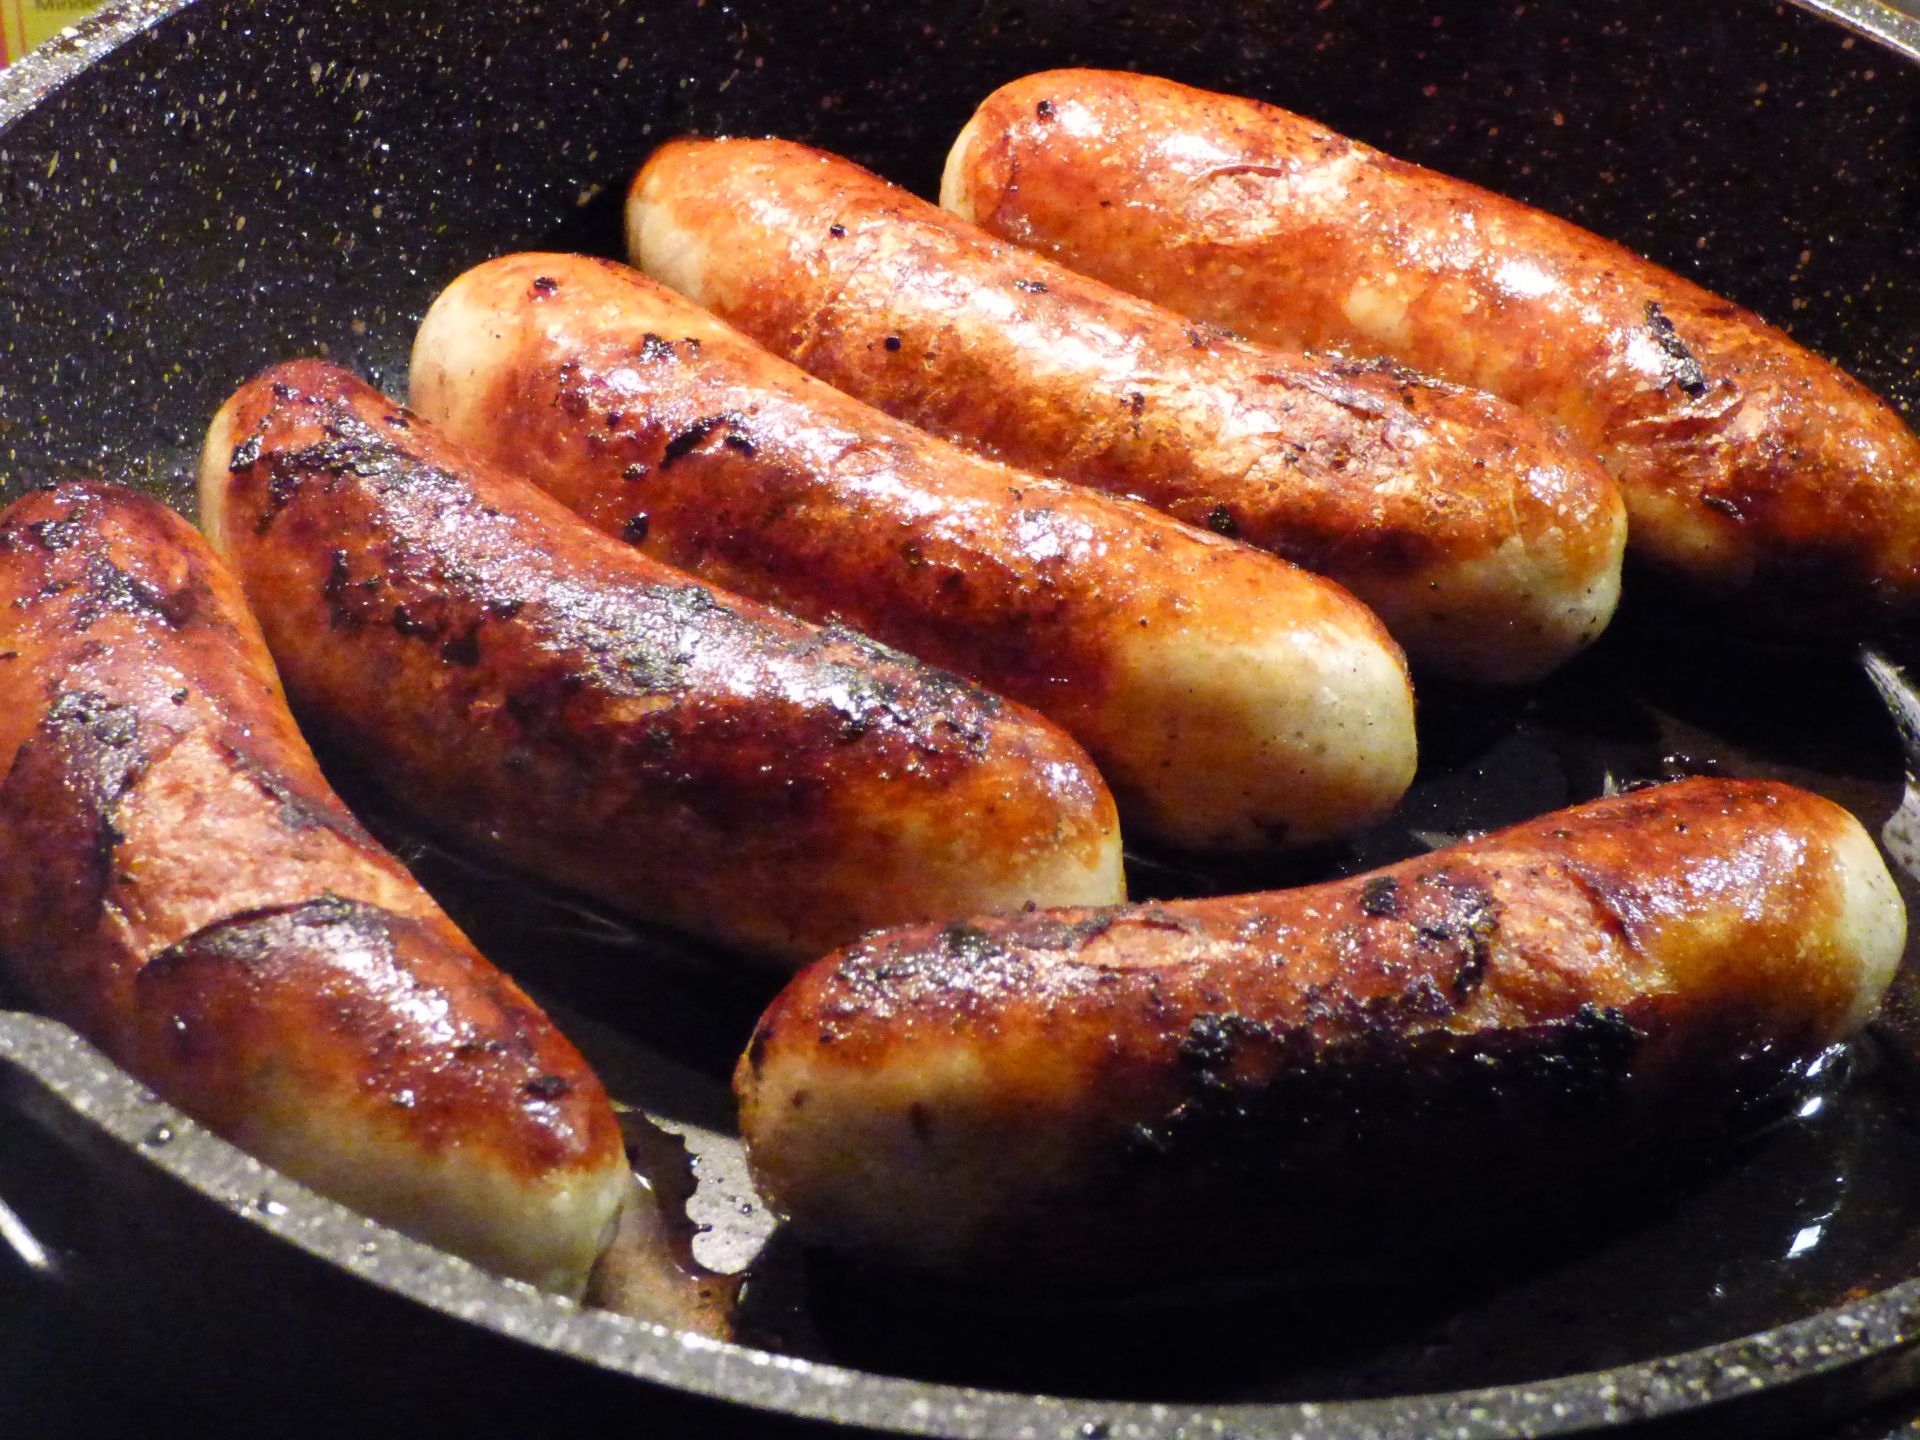 fried sausage in the pan